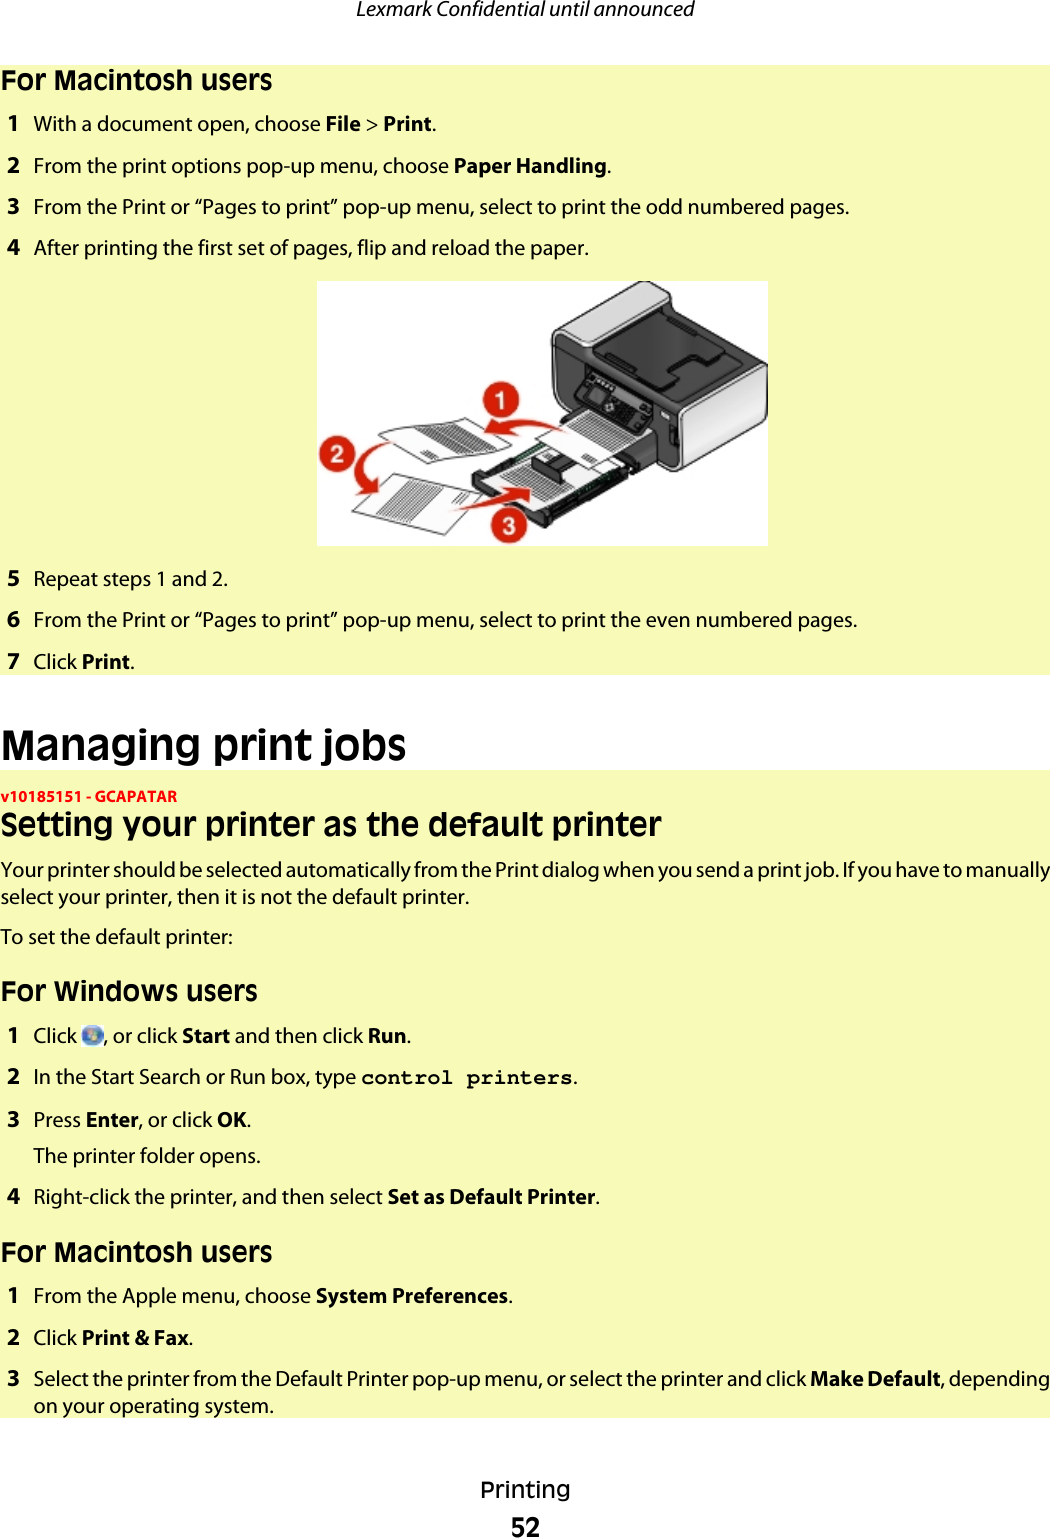 For Macintosh users1With a document open, choose File &gt; Print.2From the print options pop-up menu, choose Paper Handling.3From the Print or “Pages to print” pop-up menu, select to print the odd numbered pages.4After printing the first set of pages, flip and reload the paper.5Repeat steps 1 and 2.6From the Print or “Pages to print” pop-up menu, select to print the even numbered pages.7Click Print.Managing print jobsv10185151 - GCAPATARSetting your printer as the default printerYour printer should be selected automatically from the Print dialog when you send a print job. If you have to manuallyselect your printer, then it is not the default printer.To set the default printer:For Windows users1Click  , or click Start and then click Run.2In the Start Search or Run box, type control printers.3Press Enter, or click OK.The printer folder opens.4Right-click the printer, and then select Set as Default Printer.For Macintosh users1From the Apple menu, choose System Preferences.2Click Print &amp; Fax.3Select the printer from the Default Printer pop-up menu, or select the printer and click Make Default, dependingon your operating system.Lexmark Confidential until announcedPrinting52